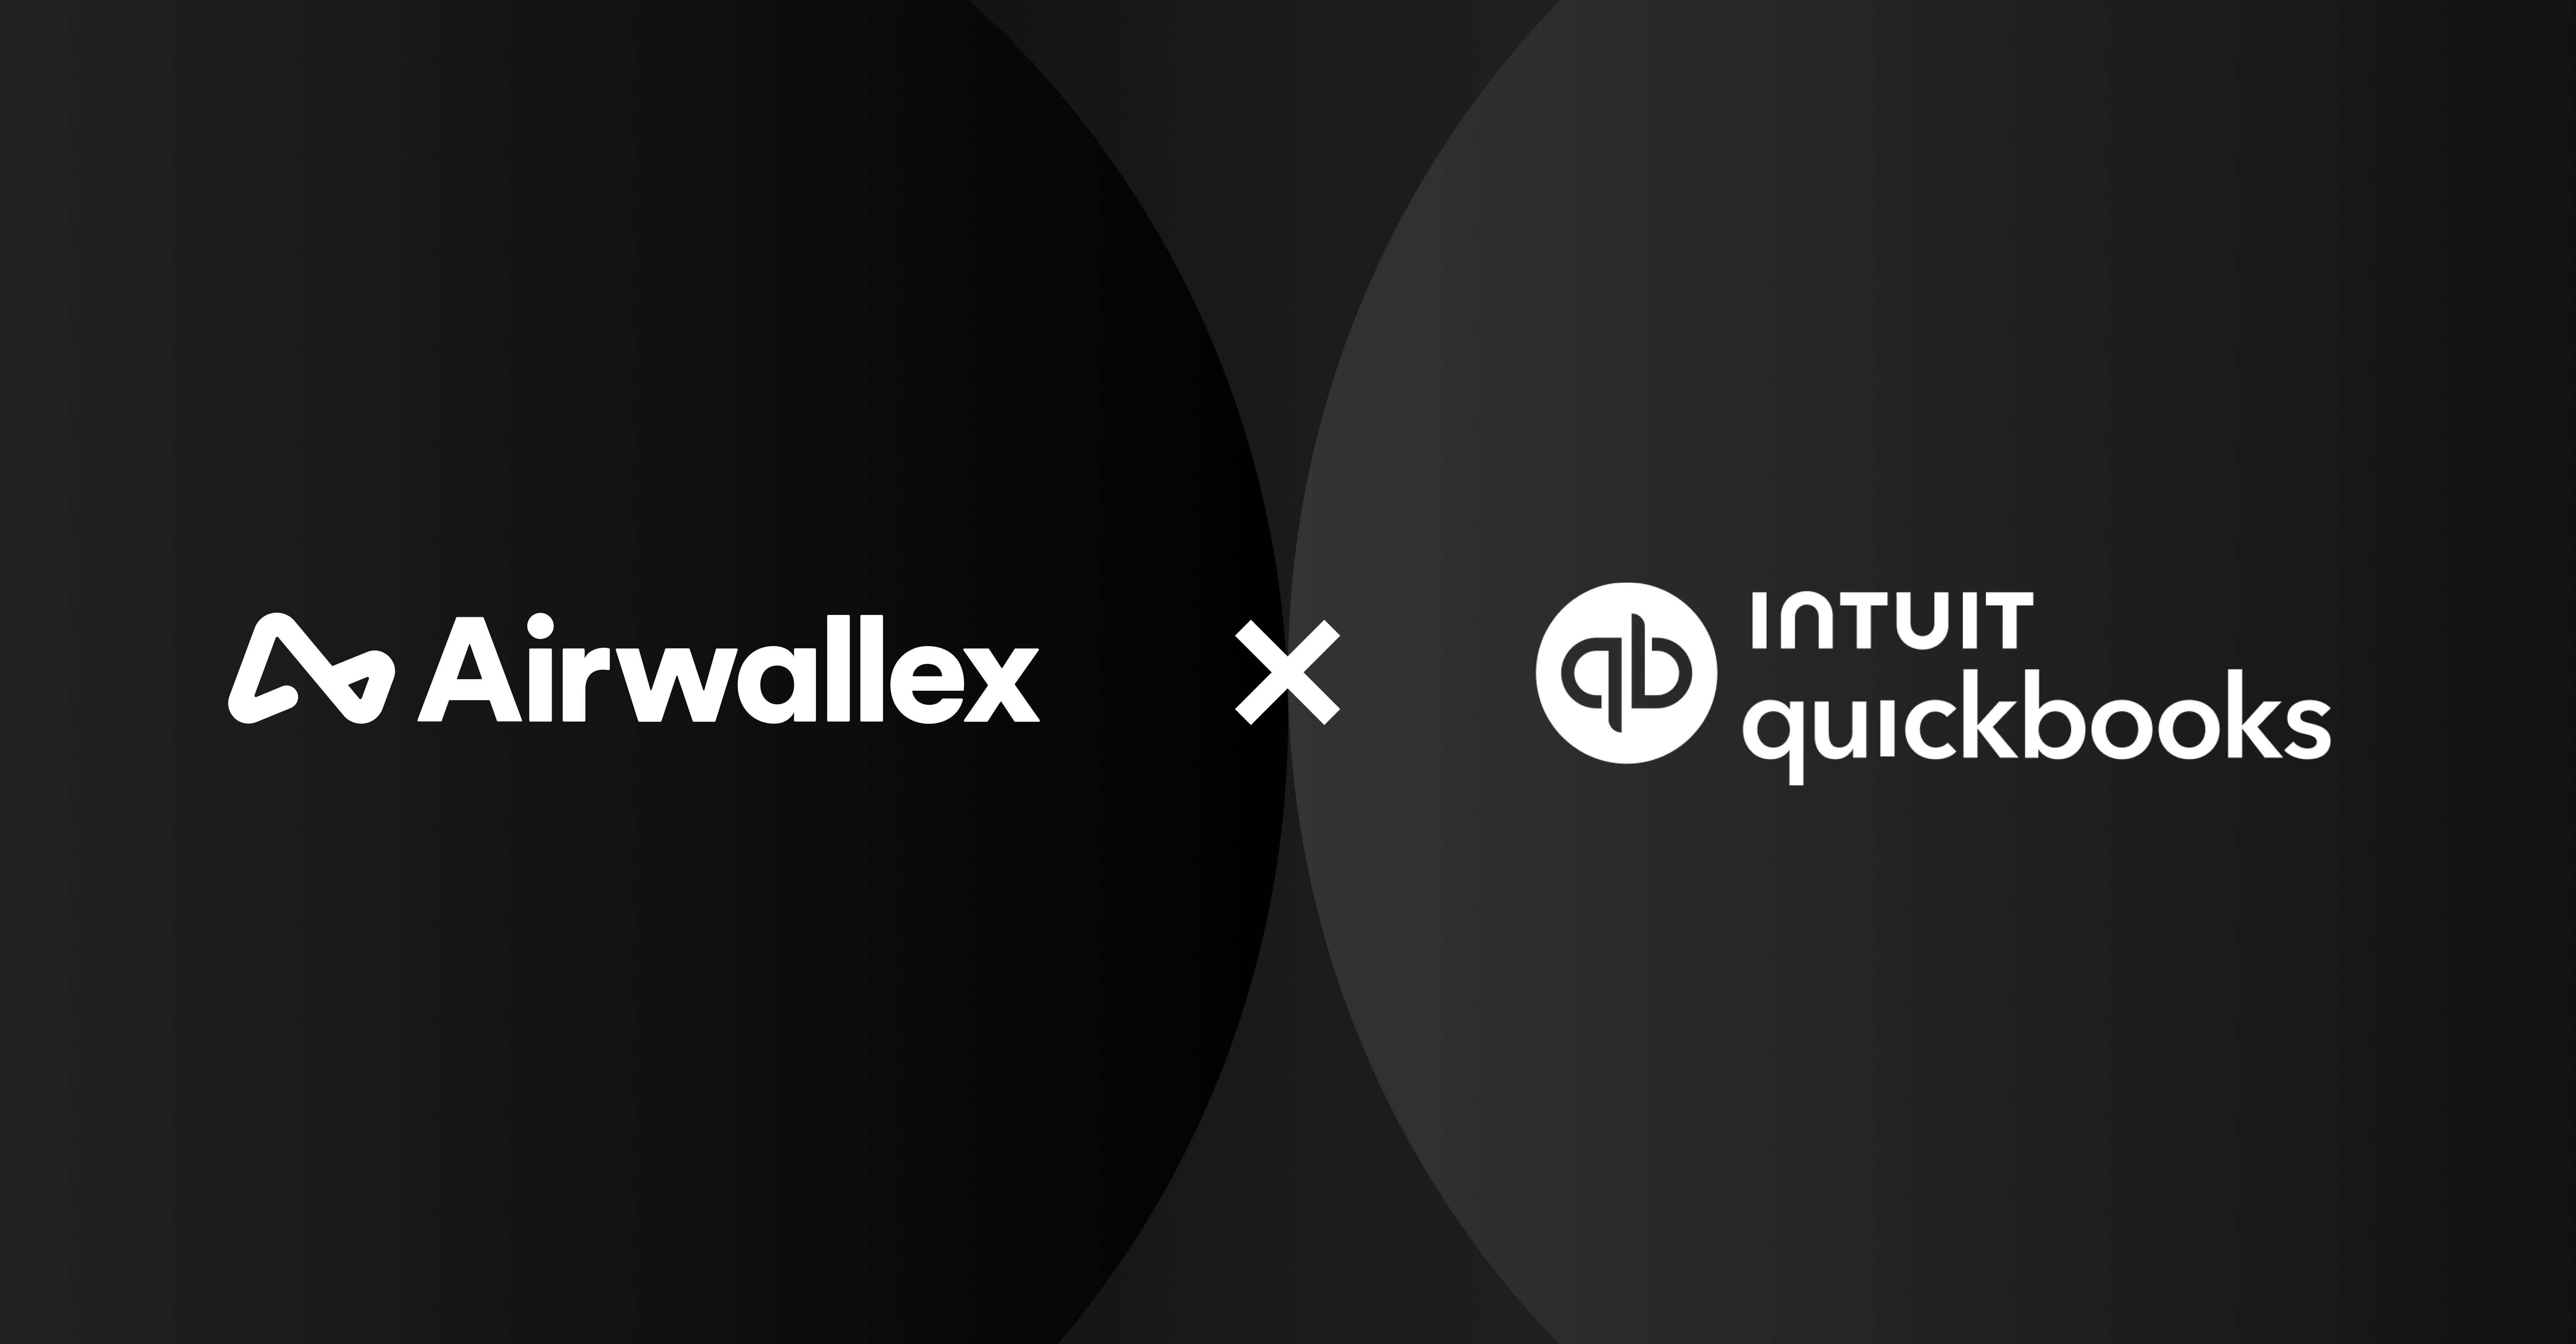 Airwallex integrates with Intuit QuickBooks to provide seamless multicurrency reporting 